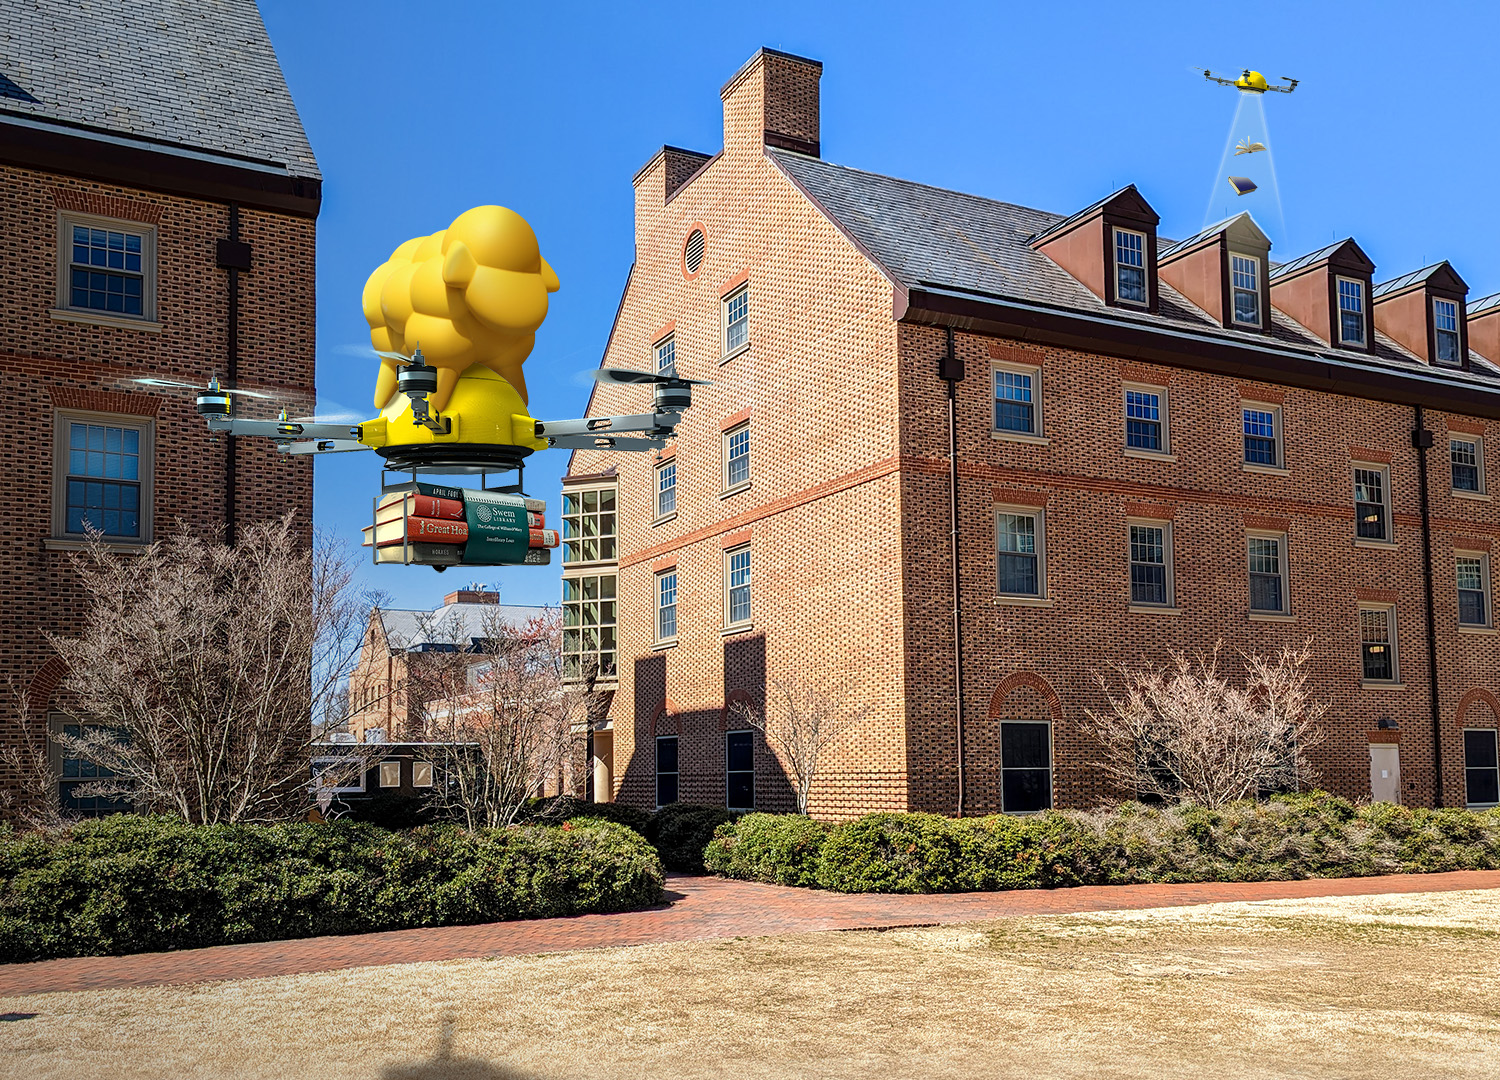 Composited image of a drone carrying a stack of books to a campus dorm